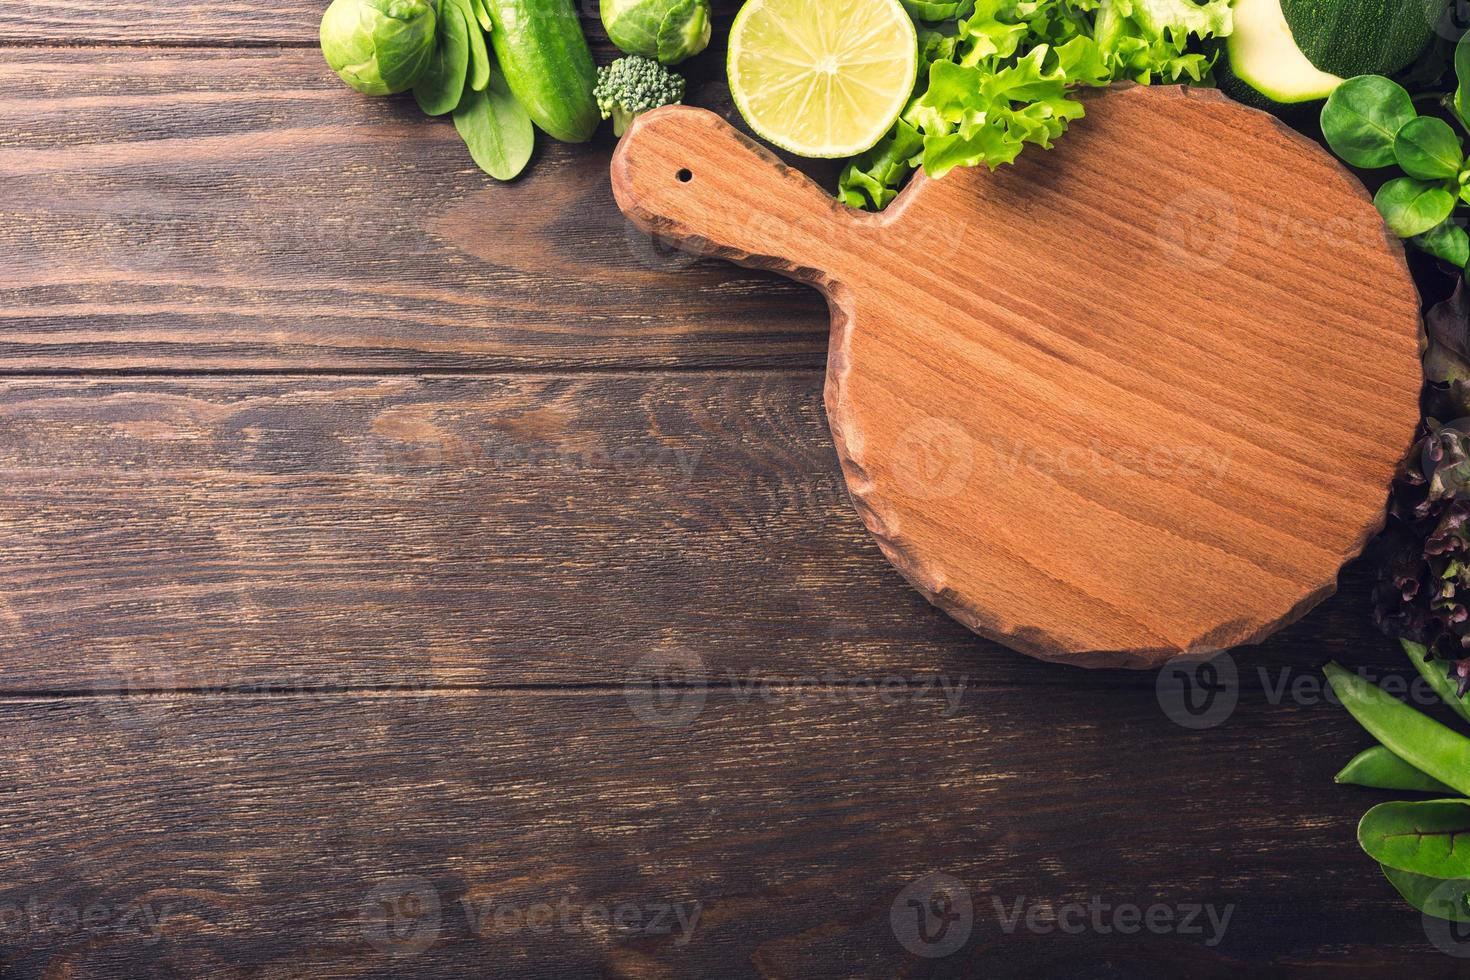 Background with assorted green vegetables photo